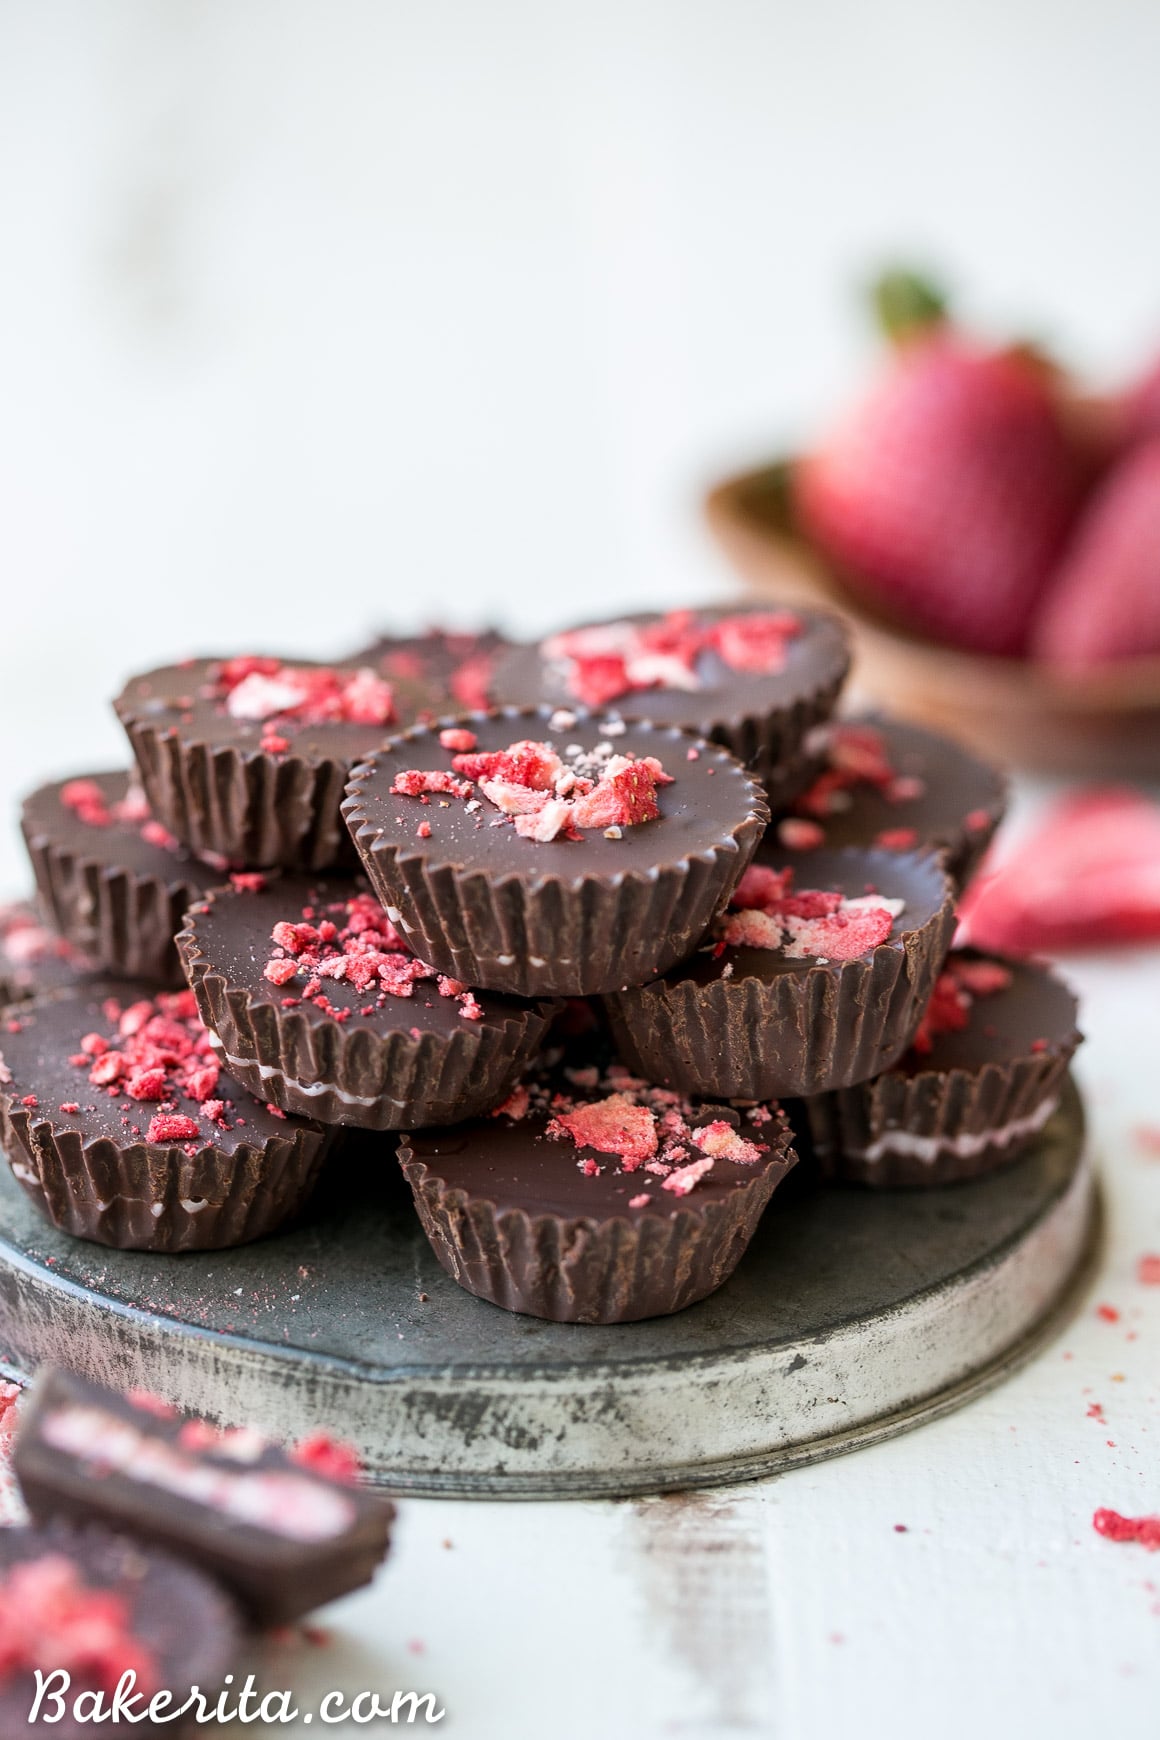 These Chocolate Strawberry Cups have a creamy strawberry + coconut butter filling encased in homemade chocolate! These gluten-free, Paleo + vegan candy cups will satisfy your sweet tooth more healthfully.